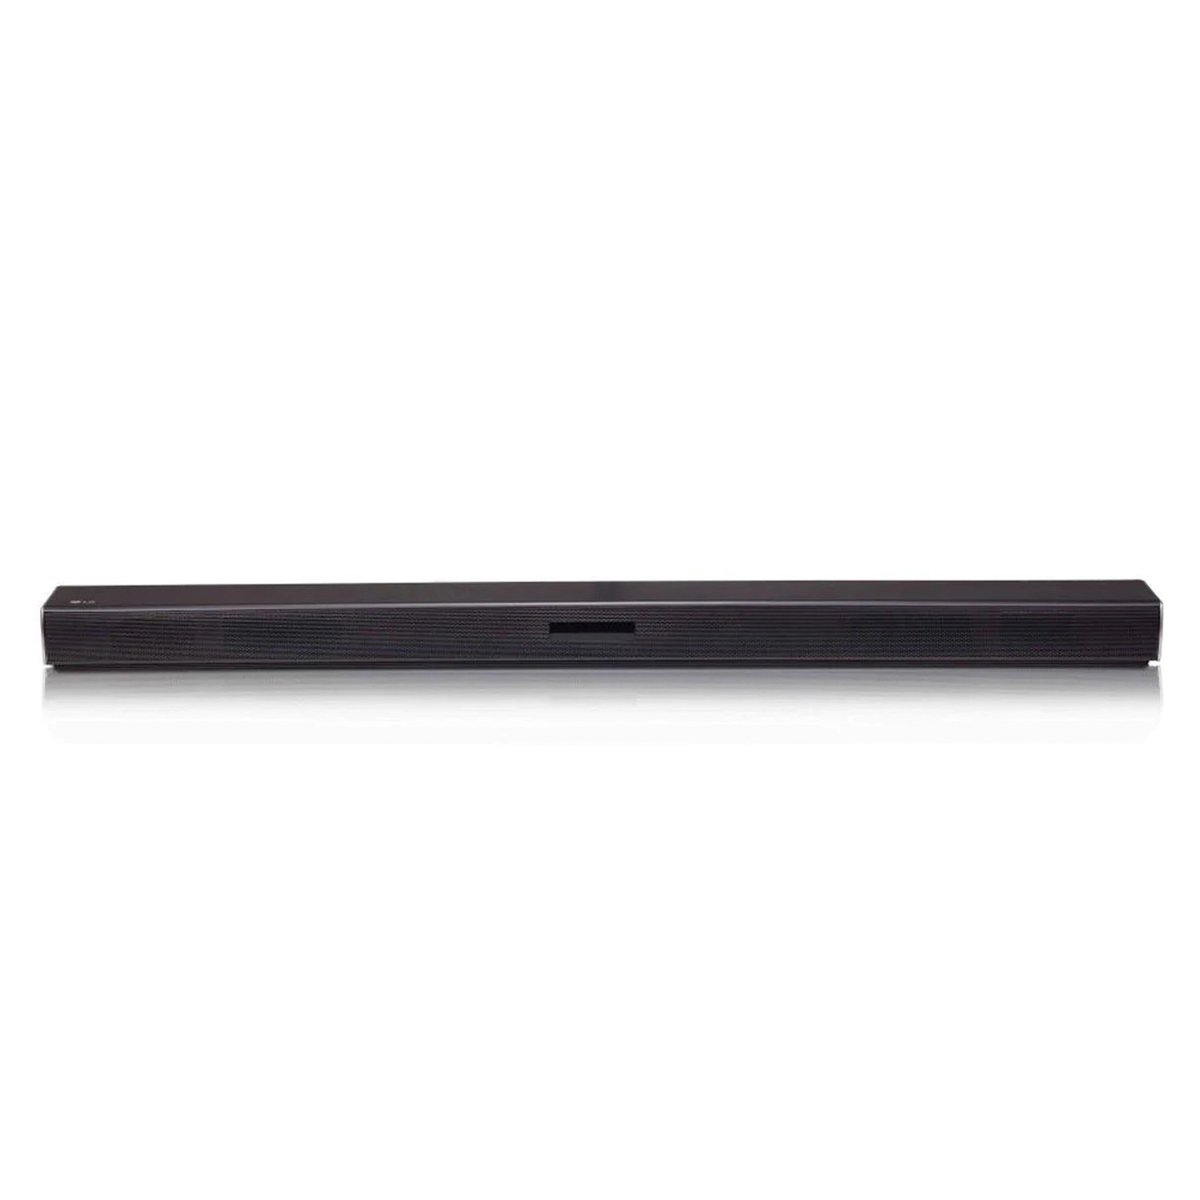 LG SK4D 2.1 Channel 300W Sound Bar with Wireless Subwoofer and Bluetooth